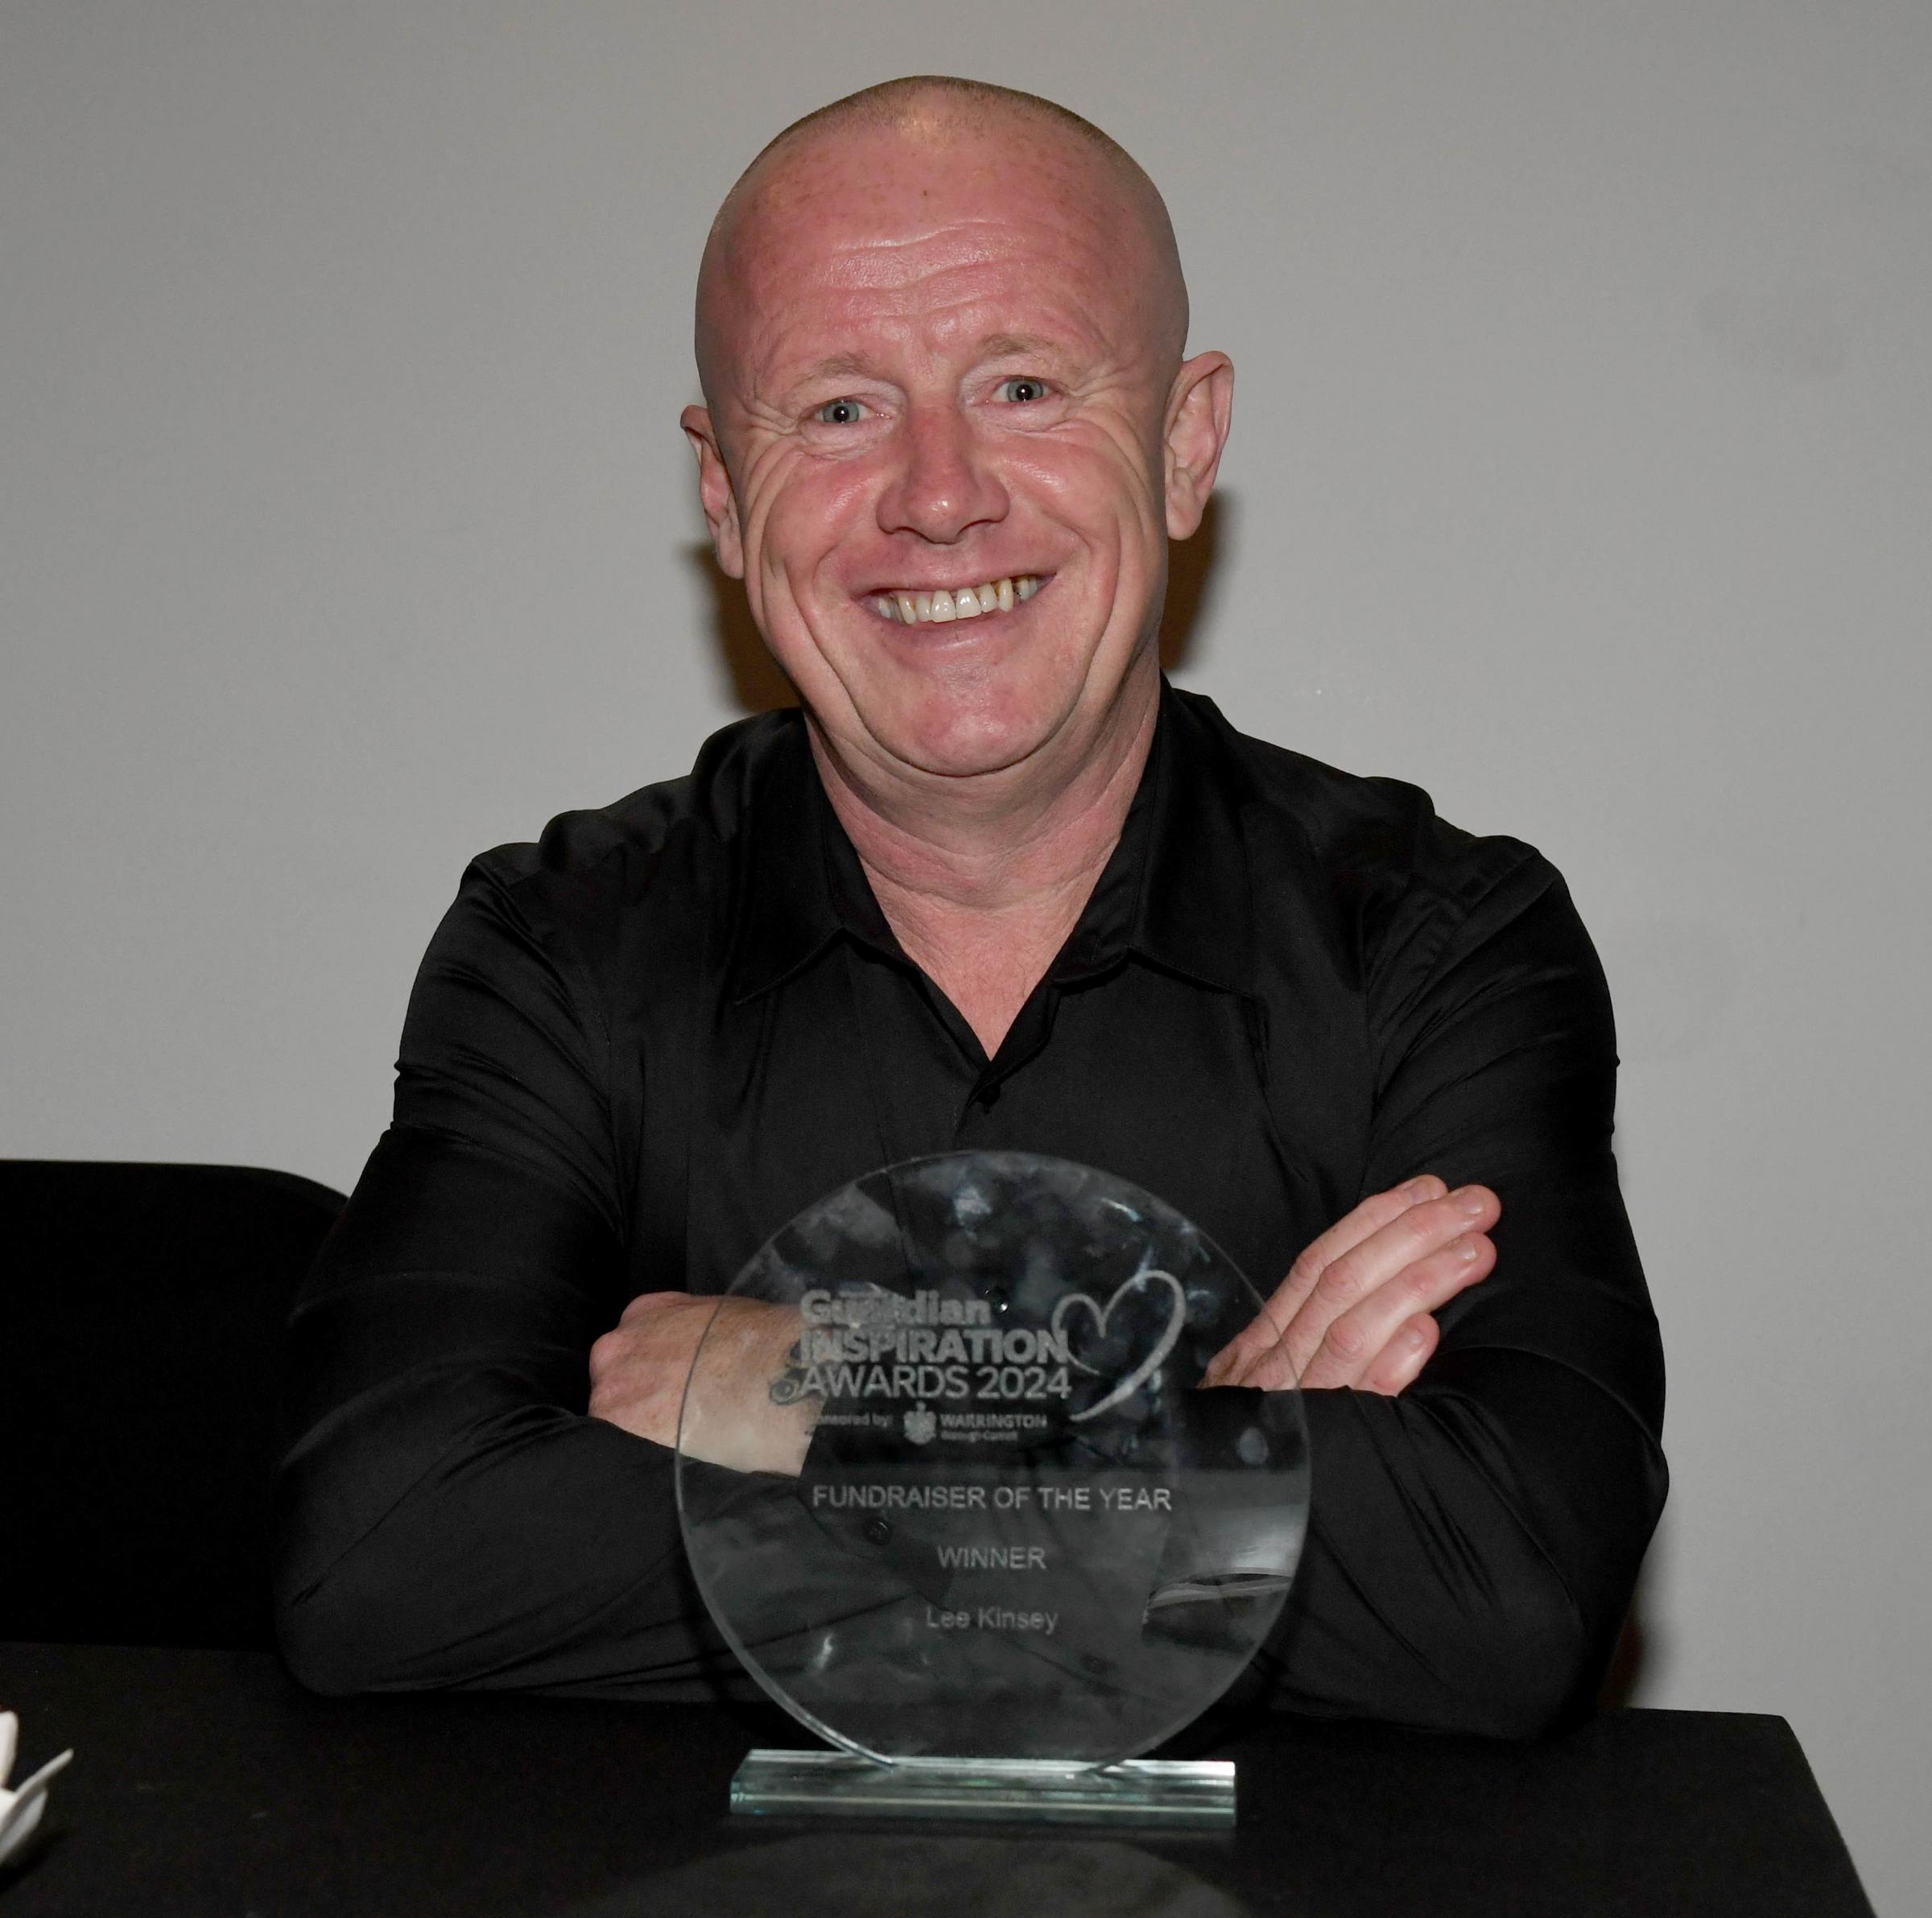 Fundraiser of the Year Lee Kinsey